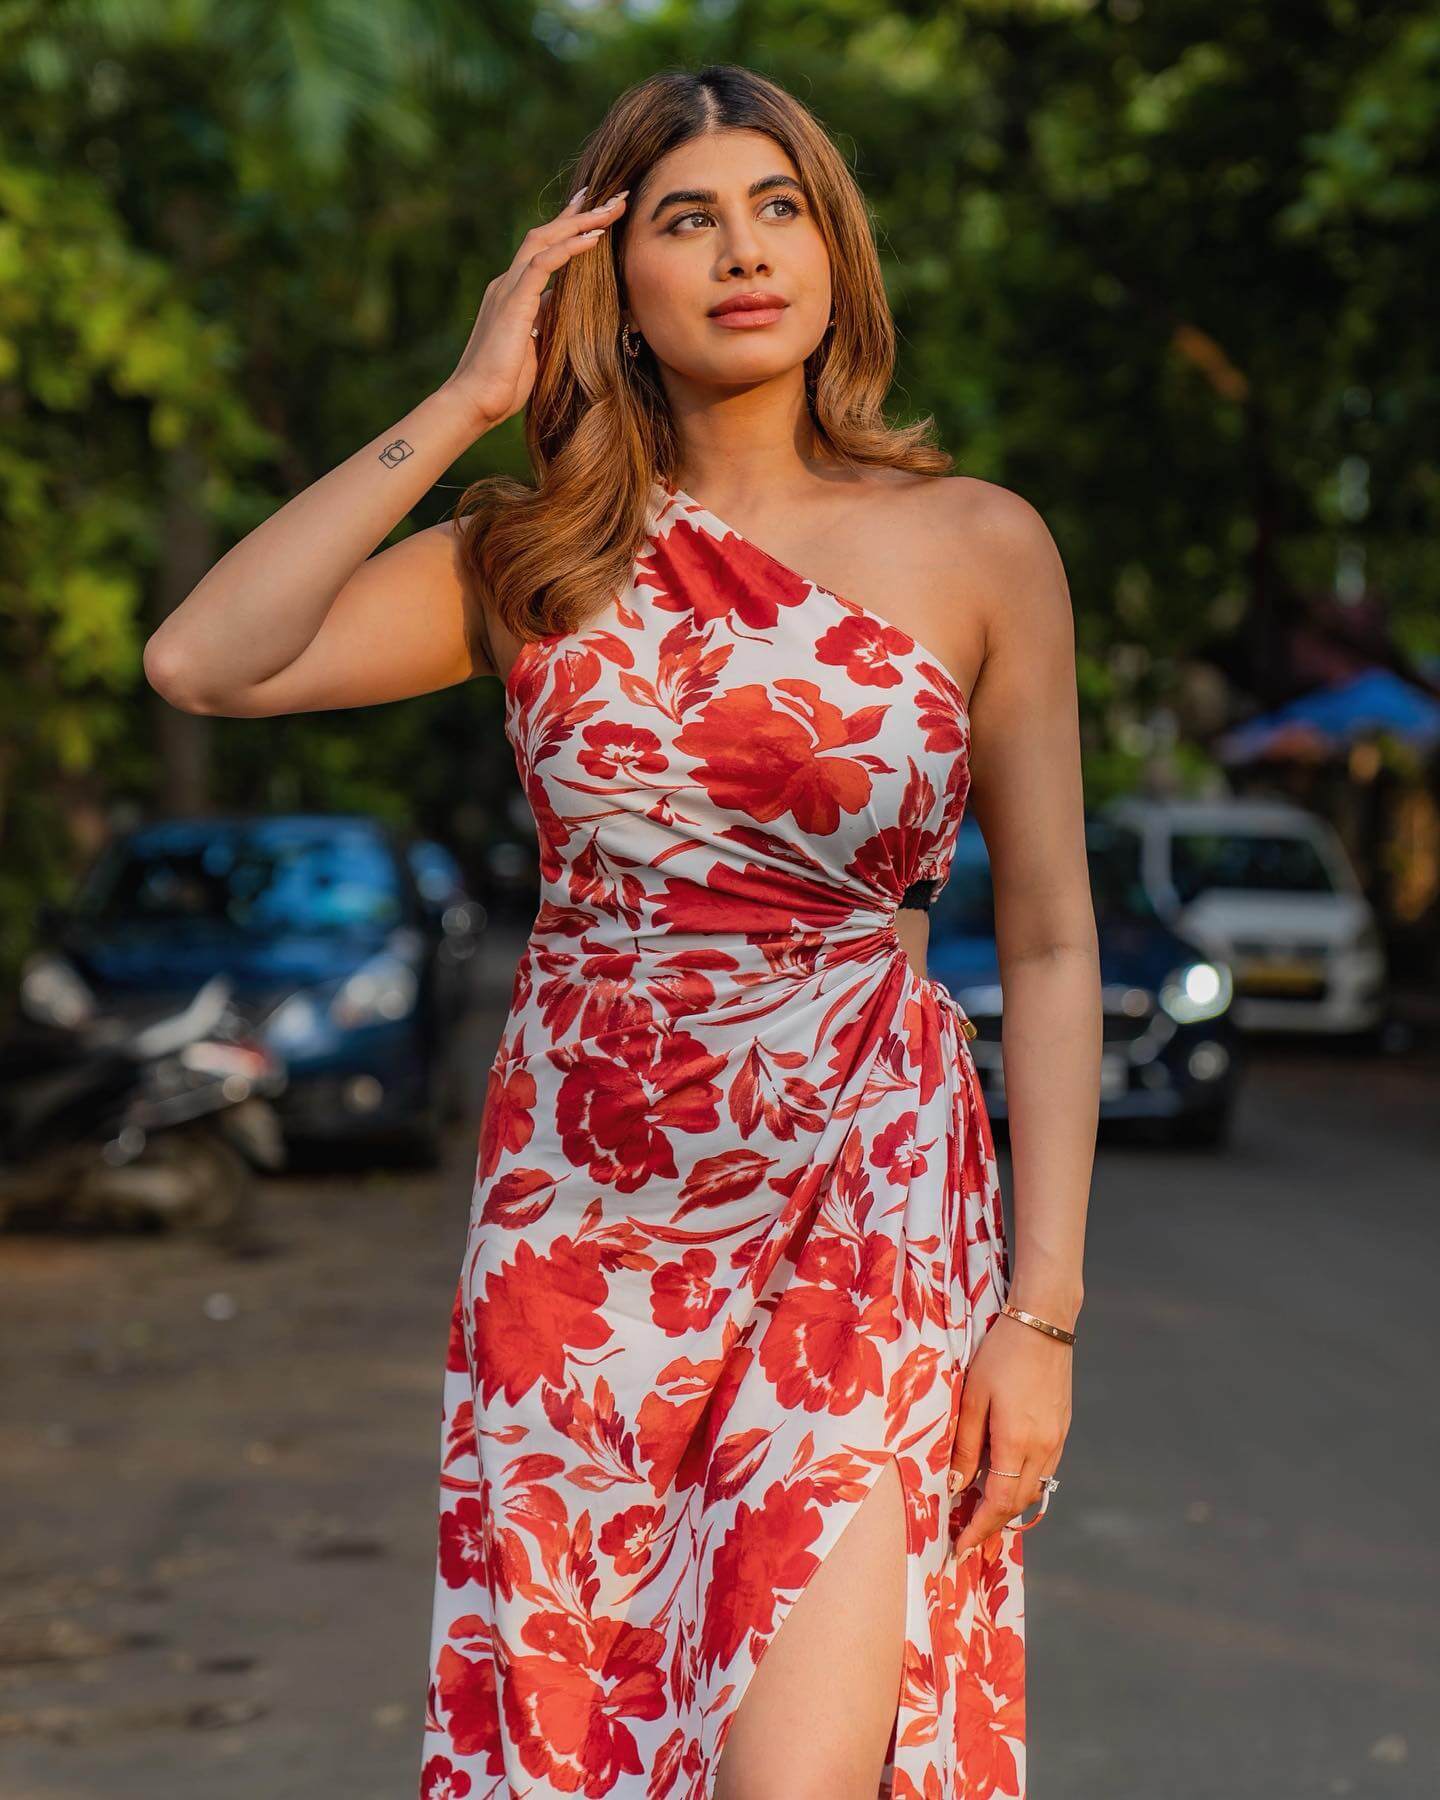 Beauty Content Creator Malvika Sitlani In White & Red Floral Print One Shoulder Cut Out Dress